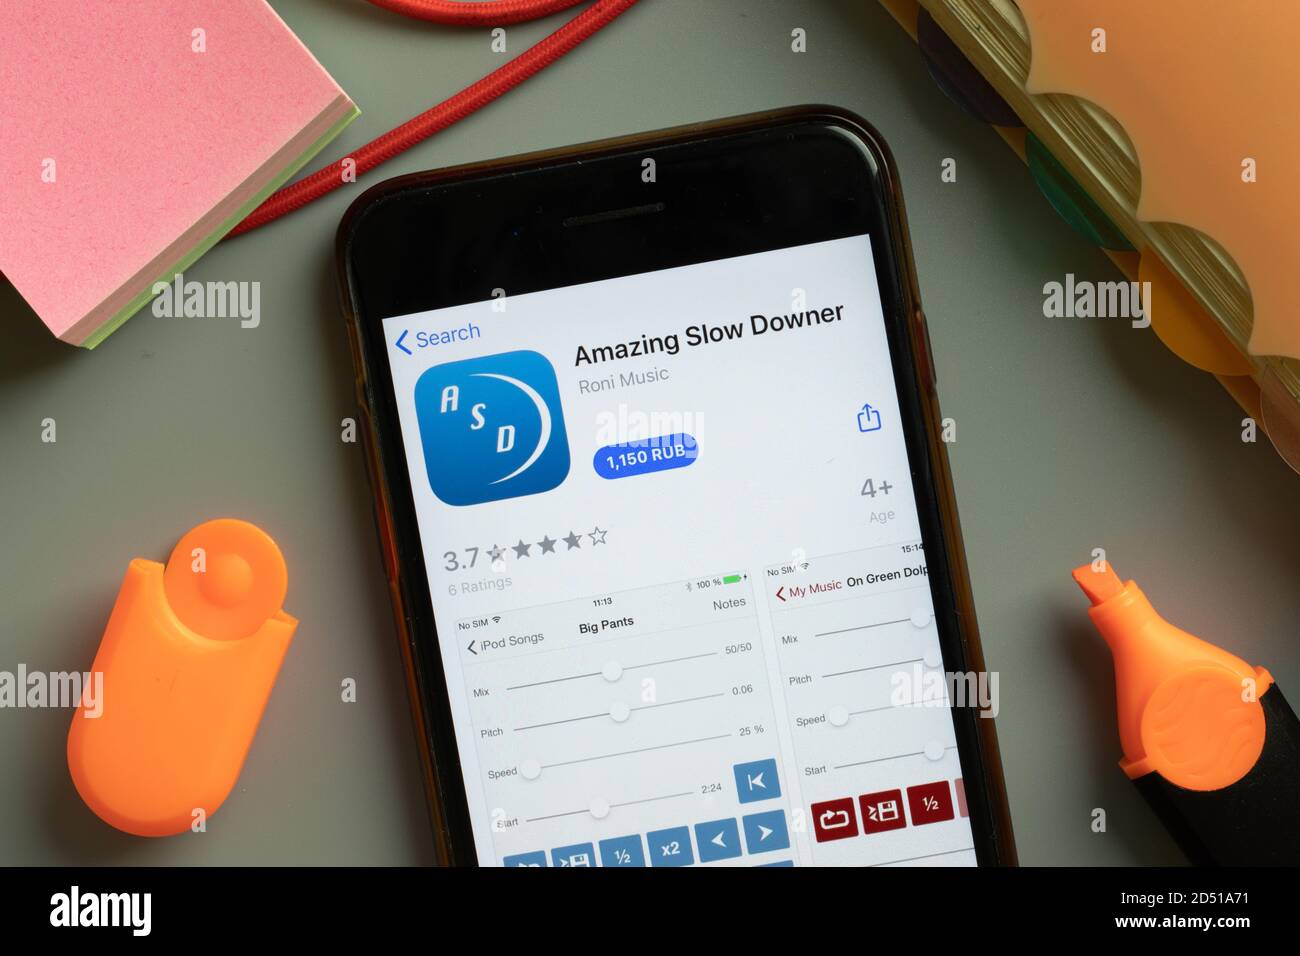 New York, USA - 29 September 2020: Amazing Slow Downer mobile app logo on phone screen close up, Illustrative Editorial Stock Photo